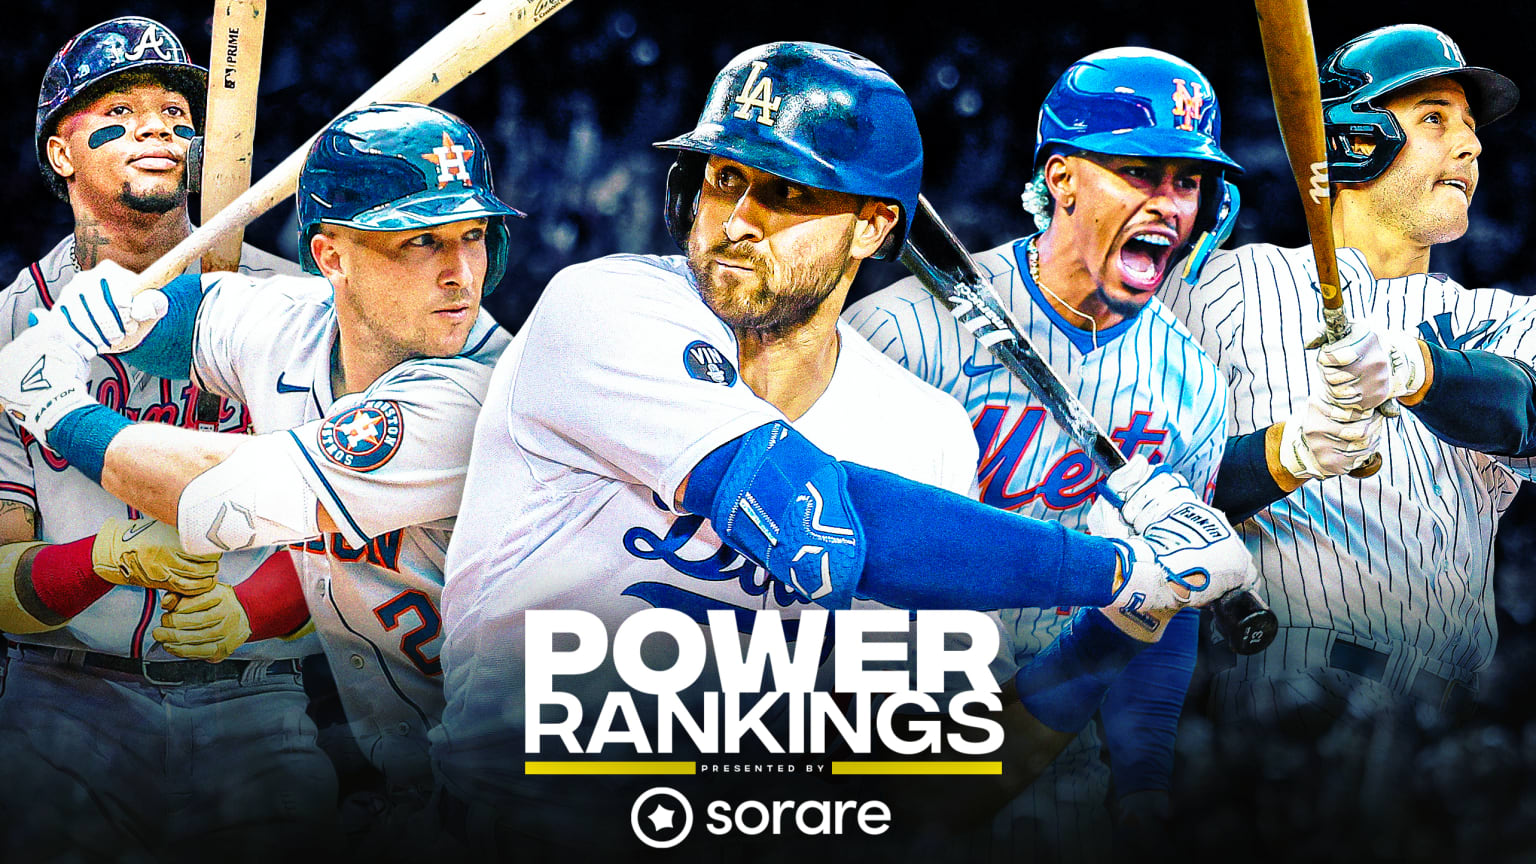 Five hitters, from the Braves, Astros, Dodgers, Mets and Yankees, shown behind the words ''POWER RANKINGS'' in the lower center